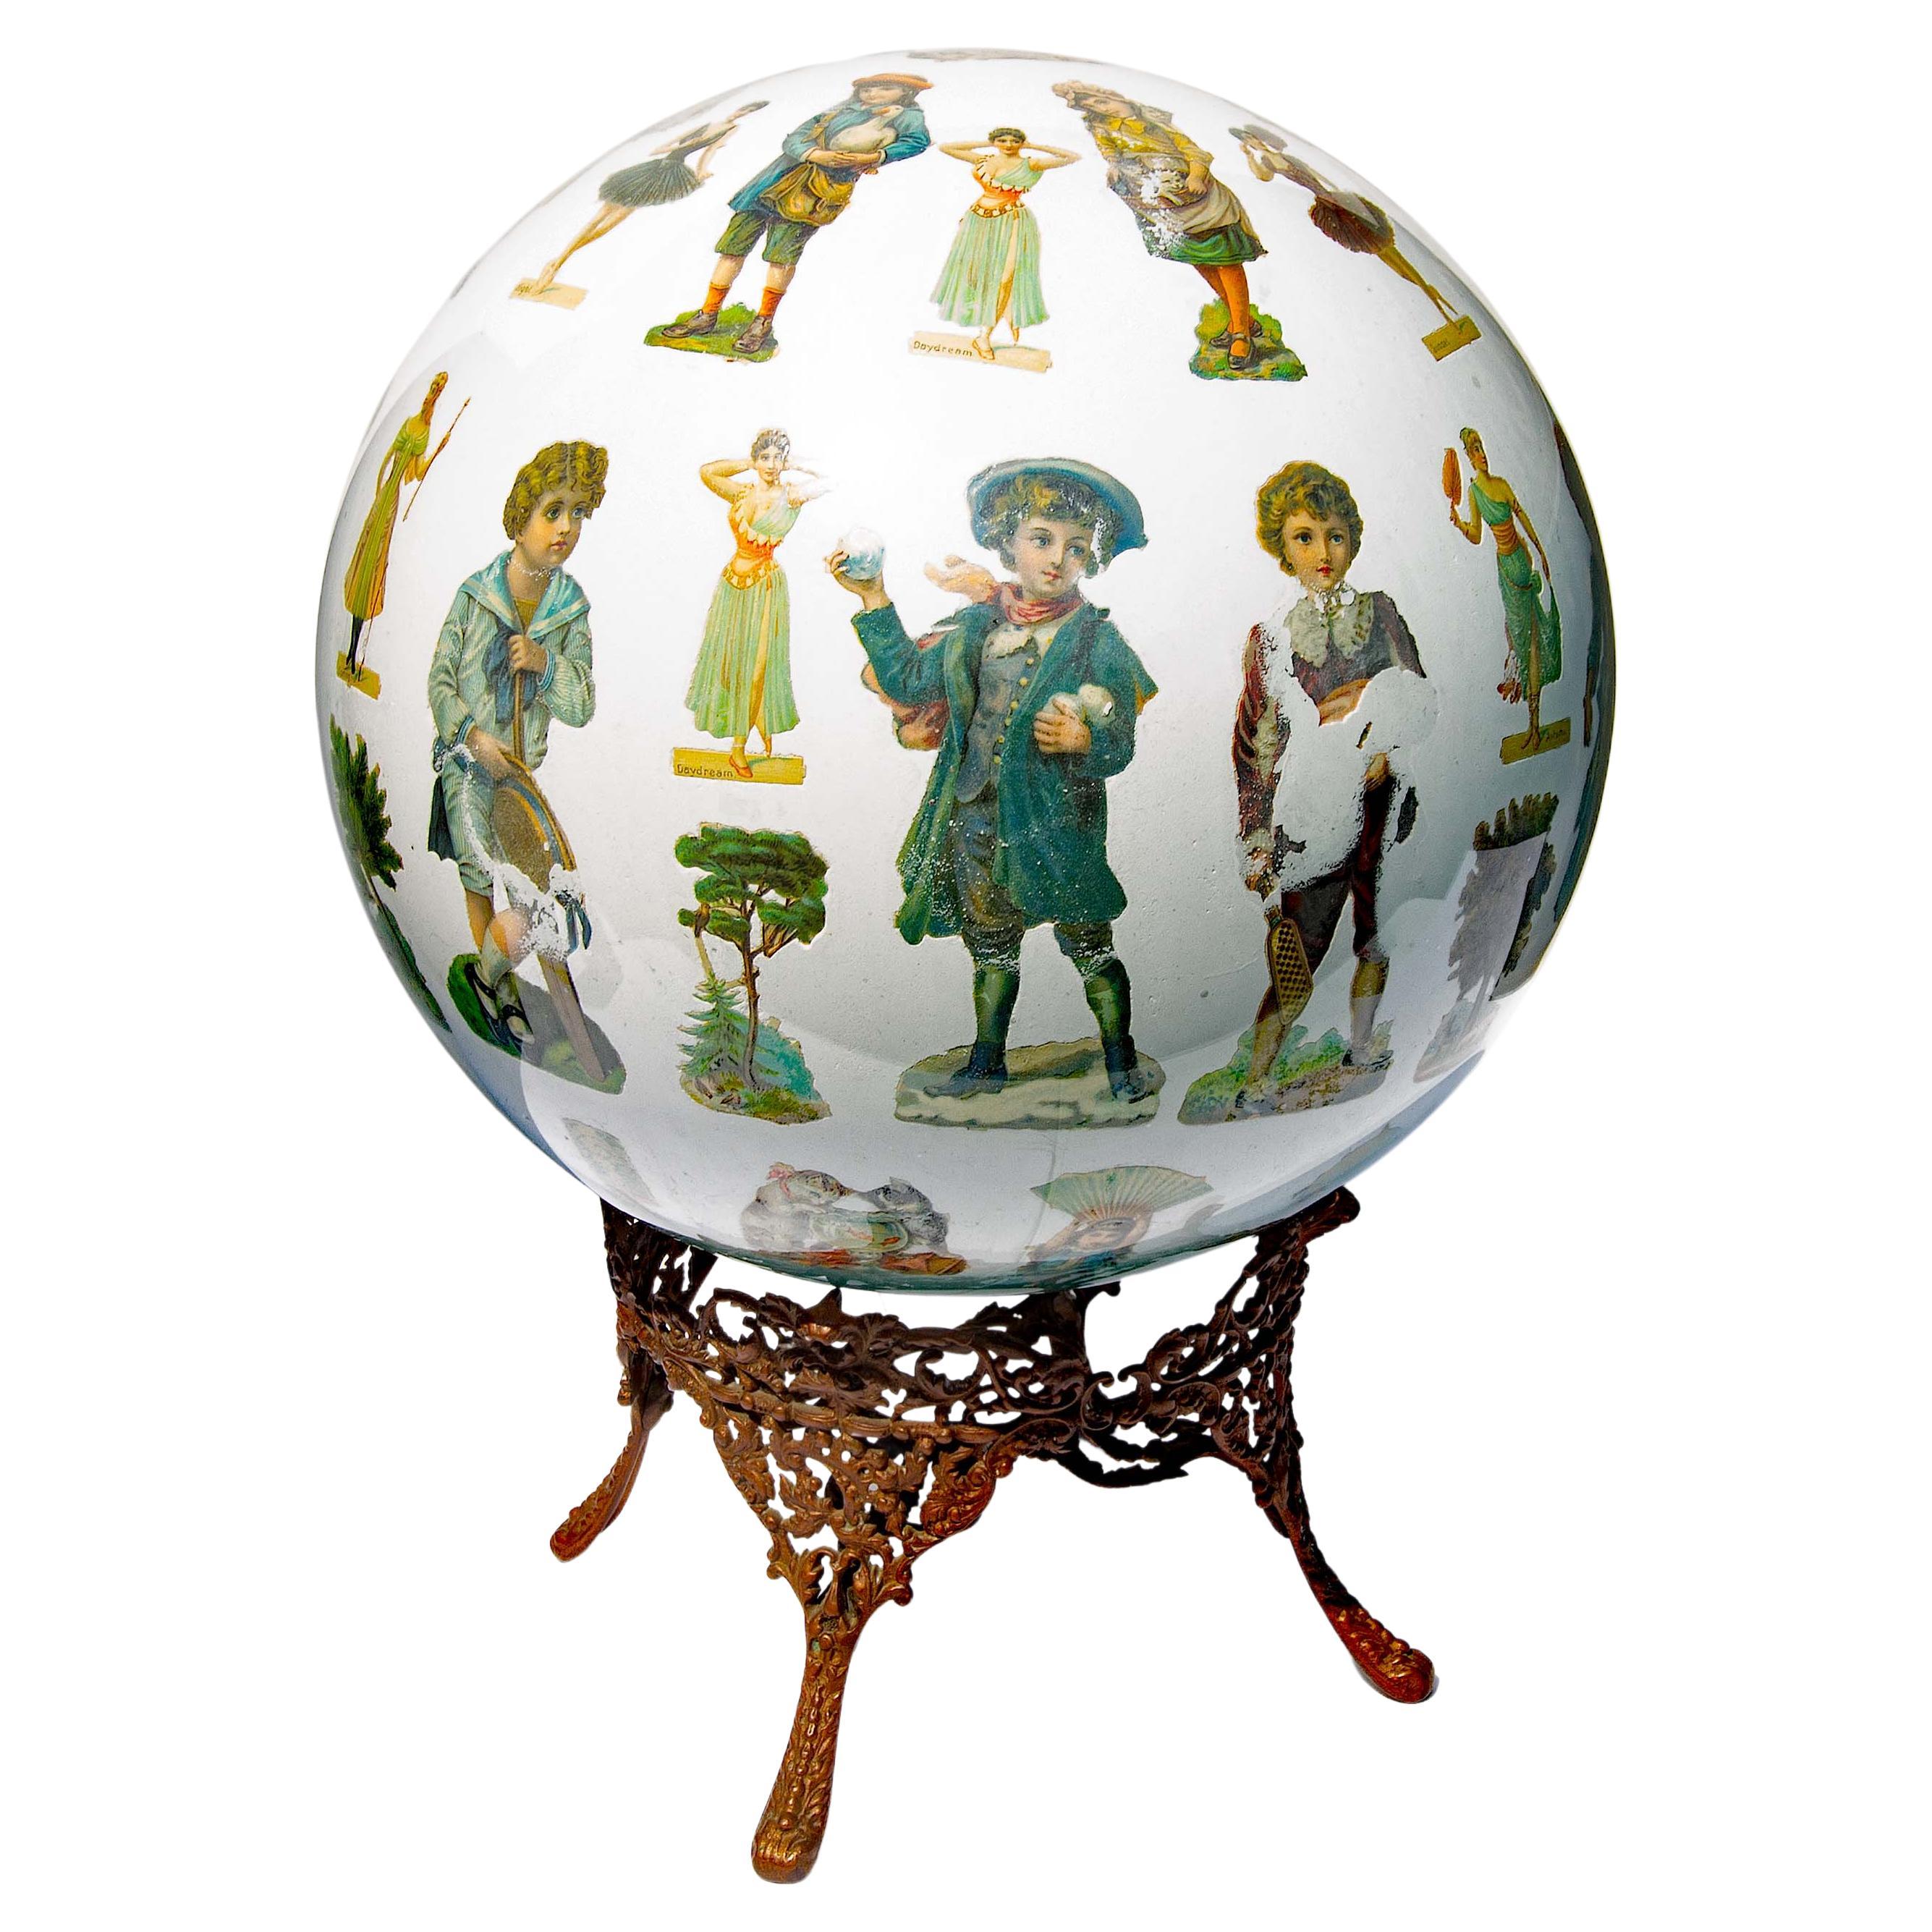 Antique decalcomania or potichomania large blown glass ball sphere. Hand blown glass sphere. 19th century cut out chromolithographs decoupaged into the interior. Amazingly through a 3/4